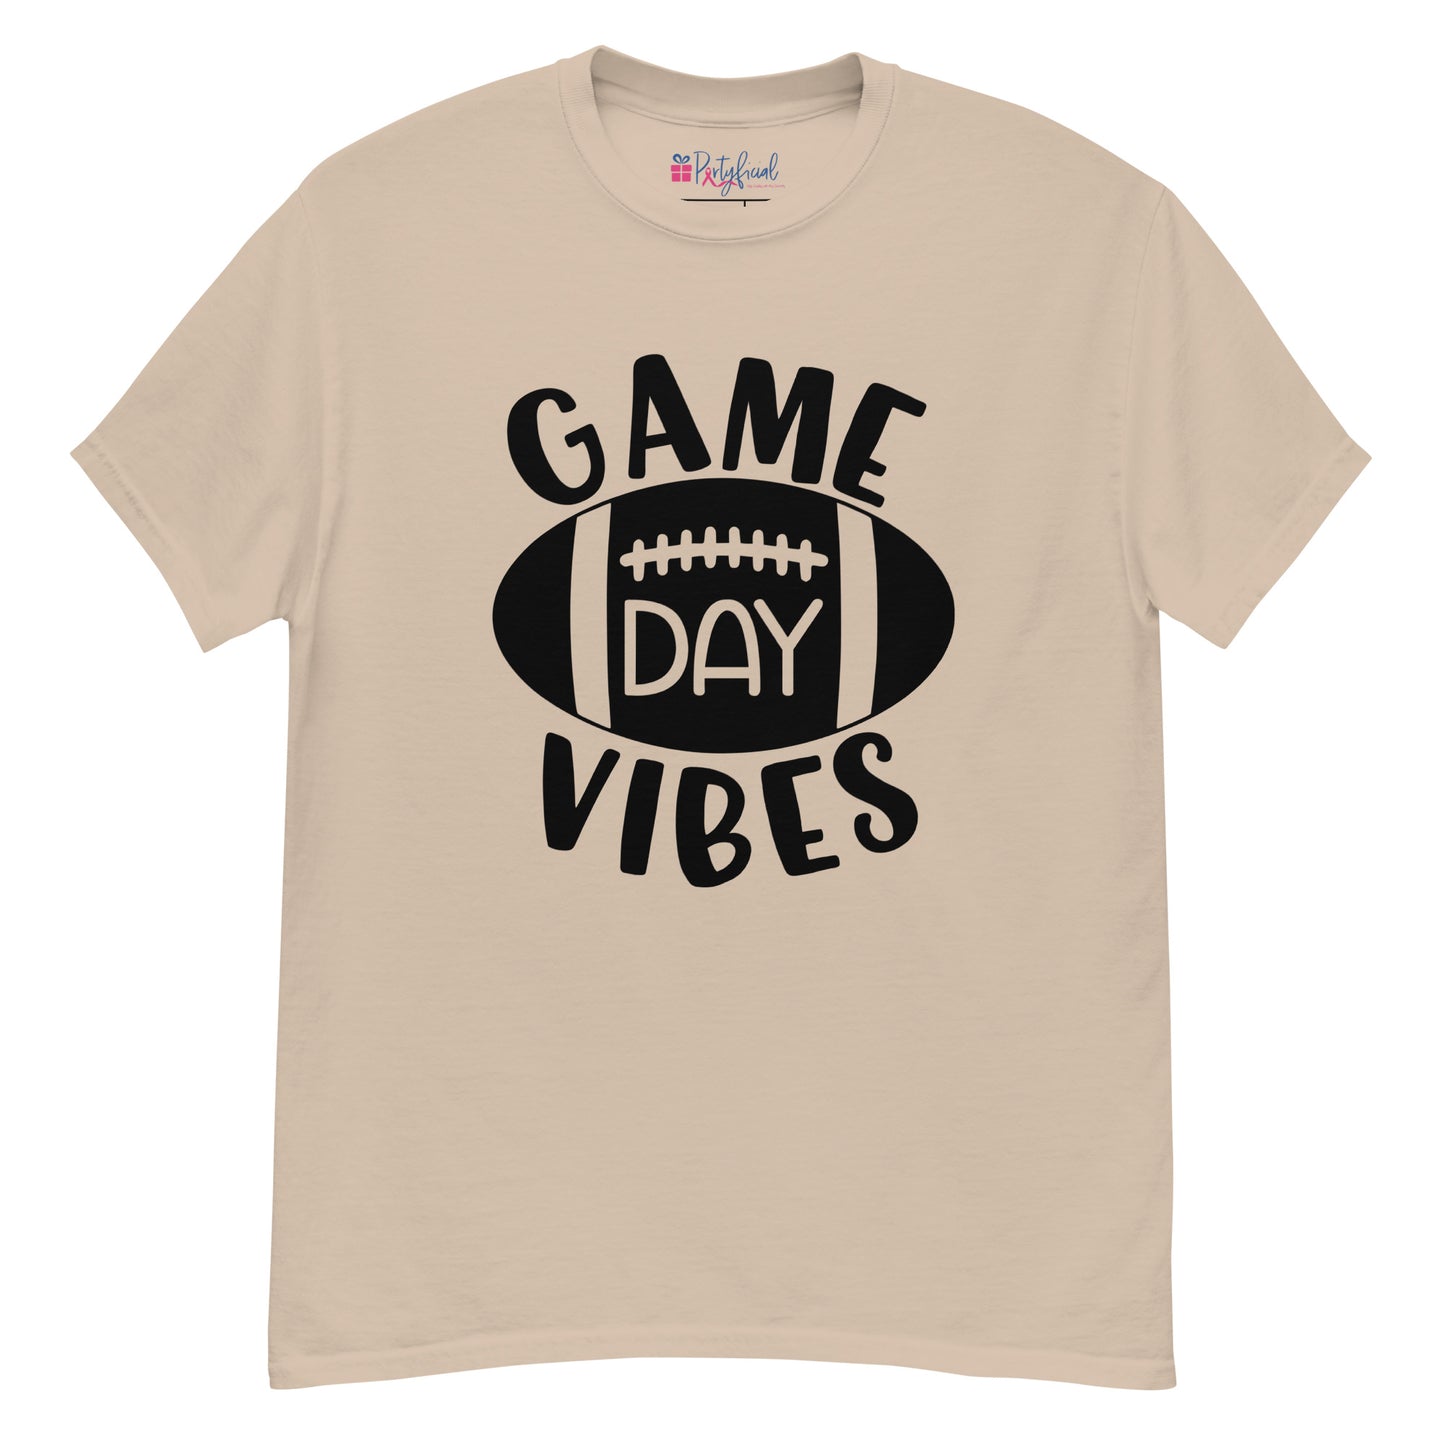 Game Day Vibes tee